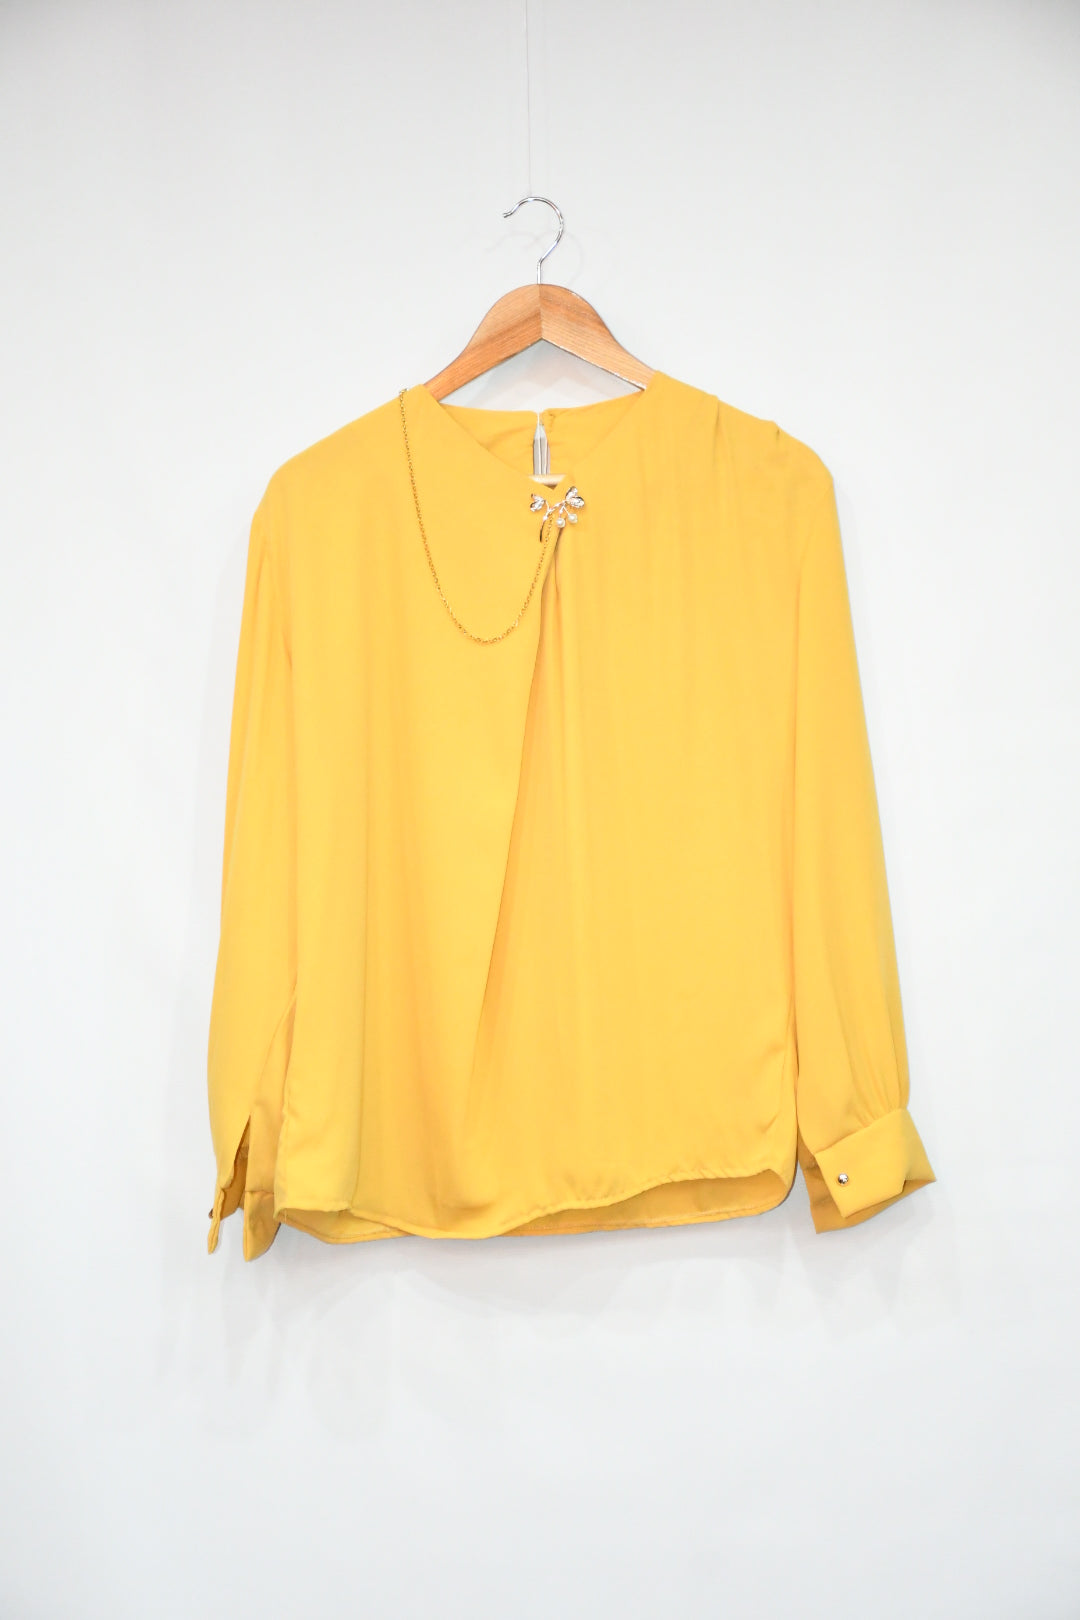 Top Shoulder Chained Style- Honey Gold